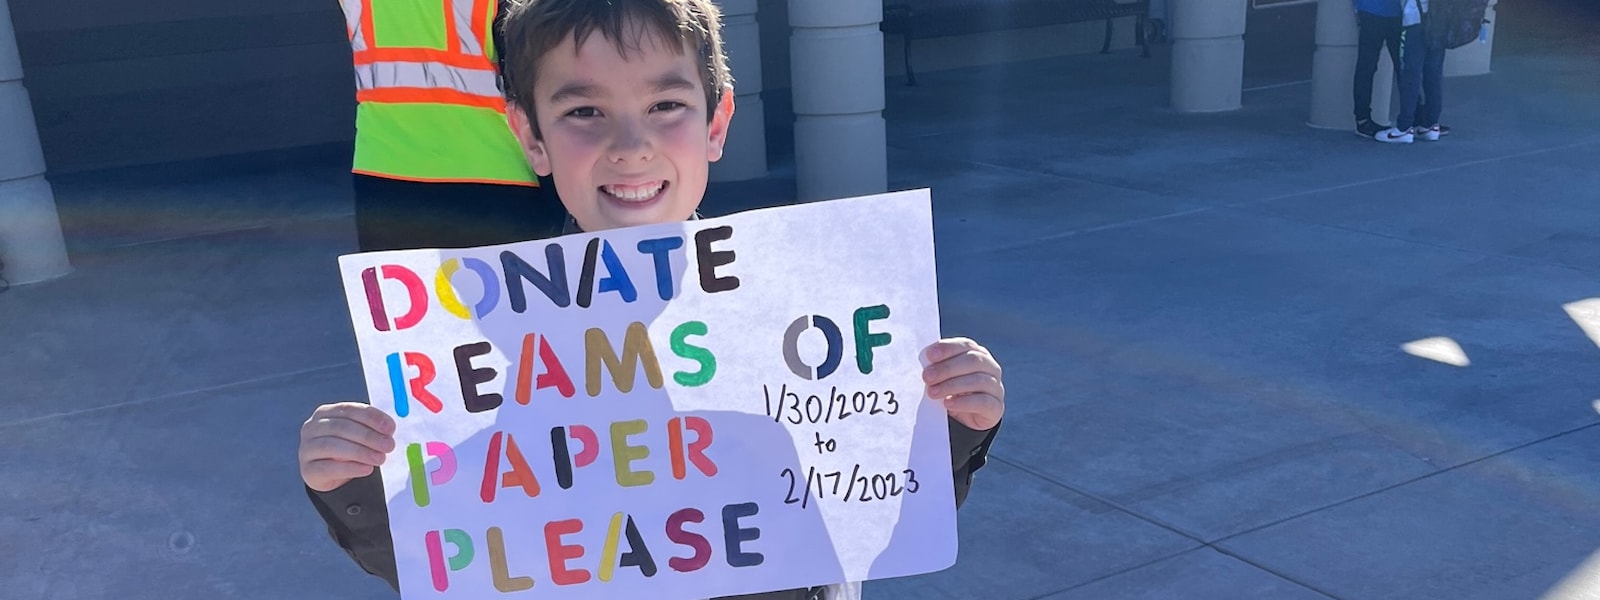 Student holding sign asking to donate paper